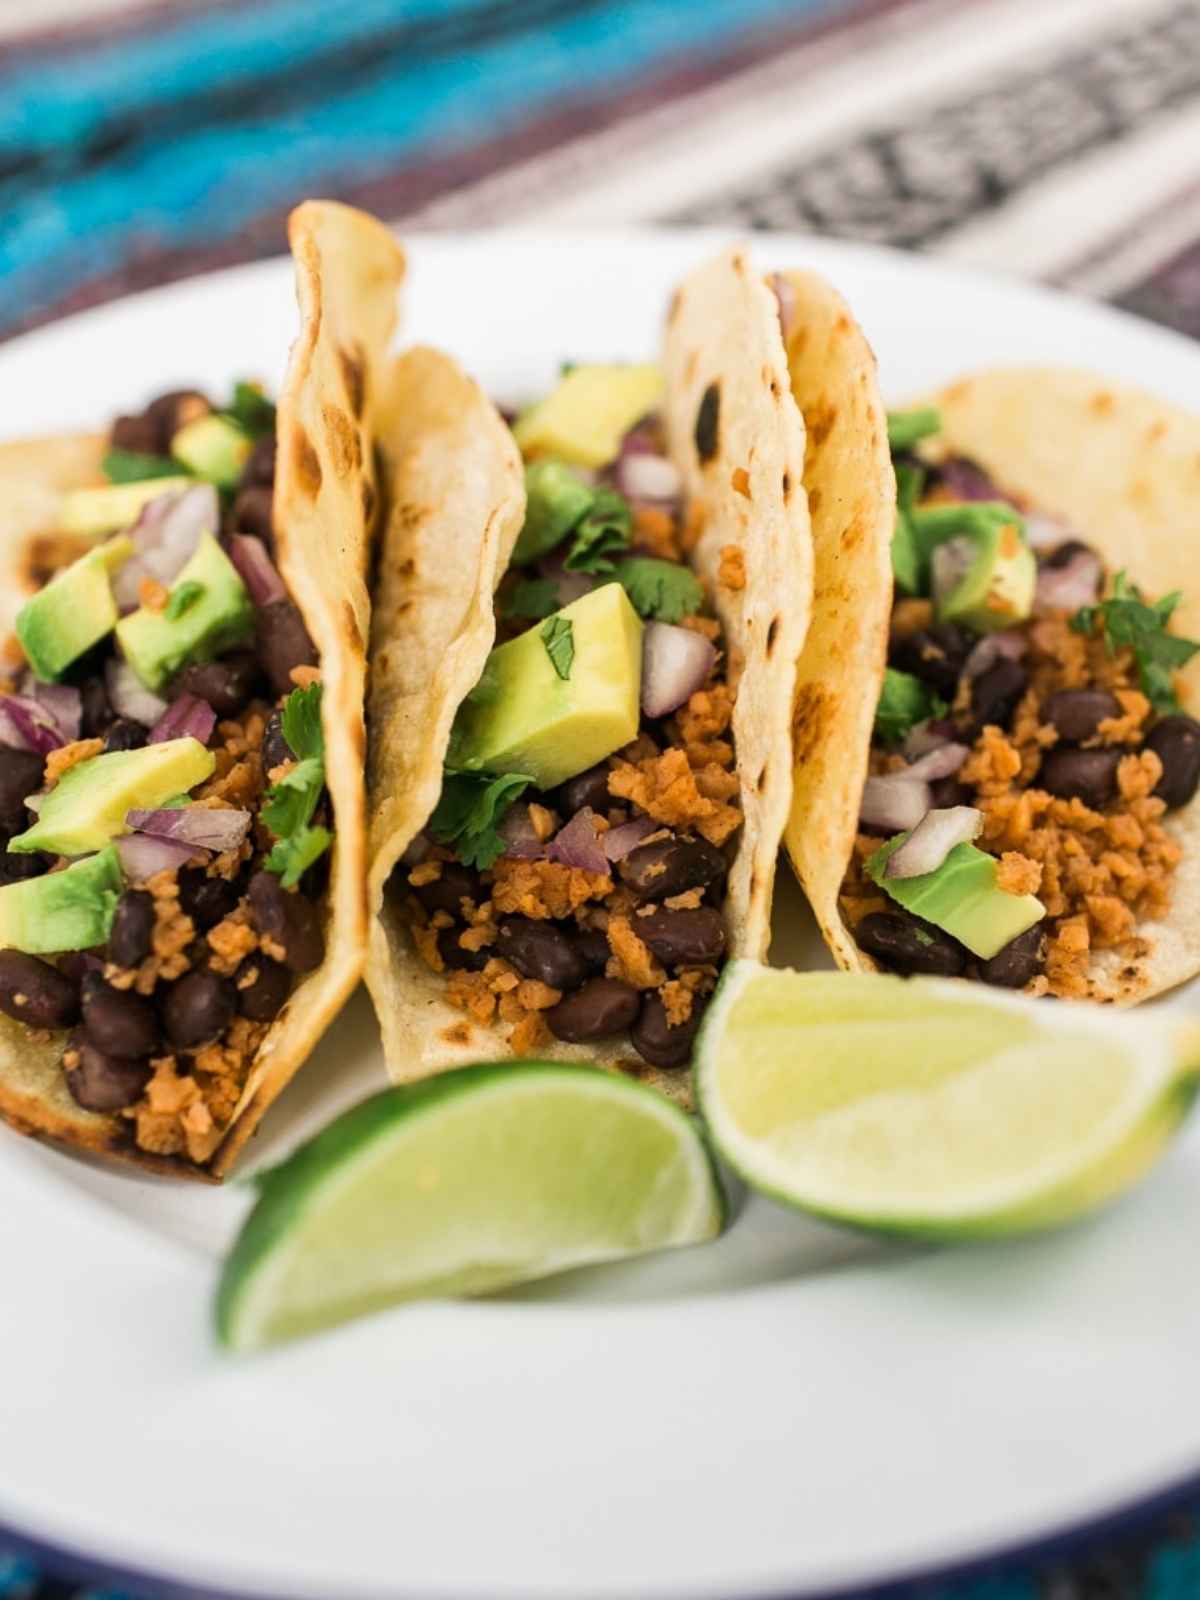 Vegan tacos filled with beans.